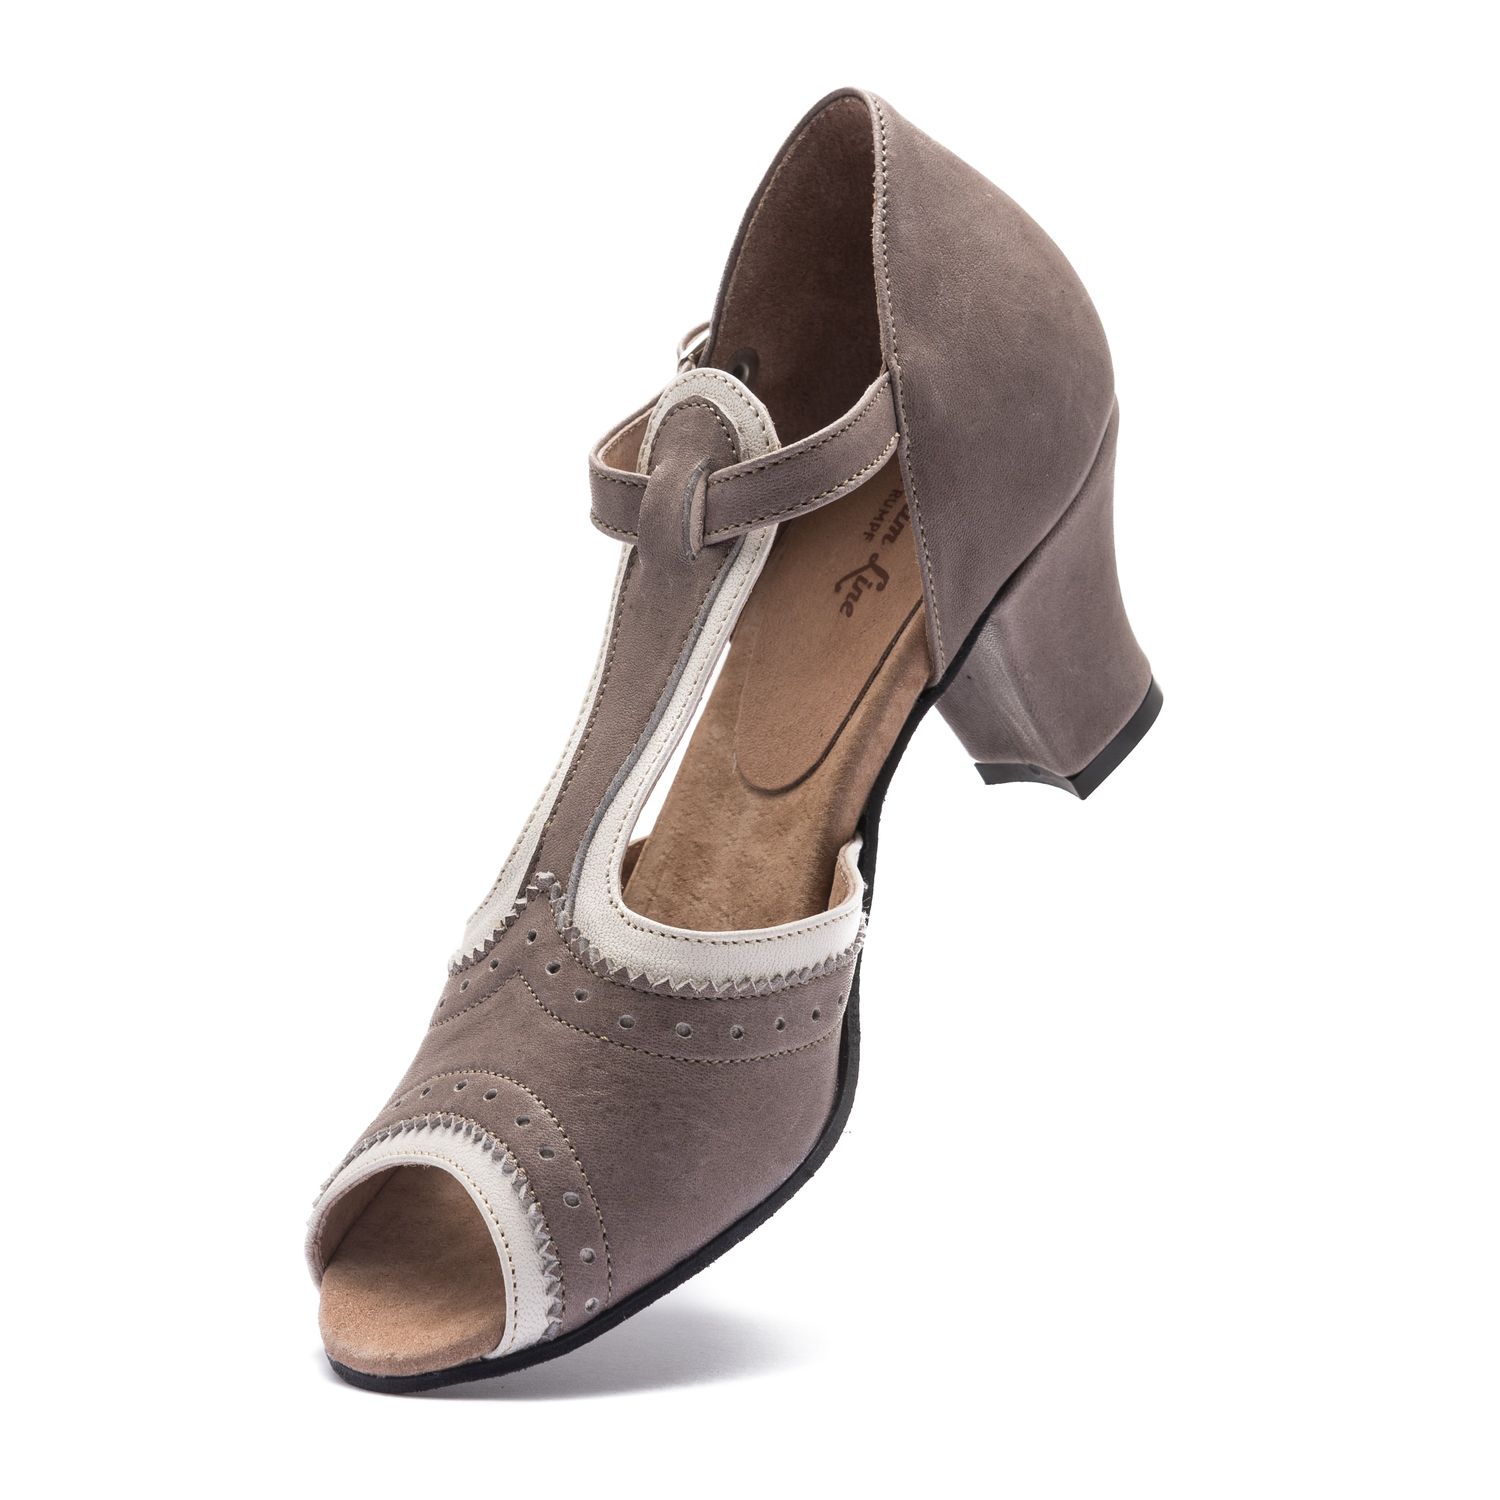 Rumpf Ladies Swing Shoes 9253 Leather